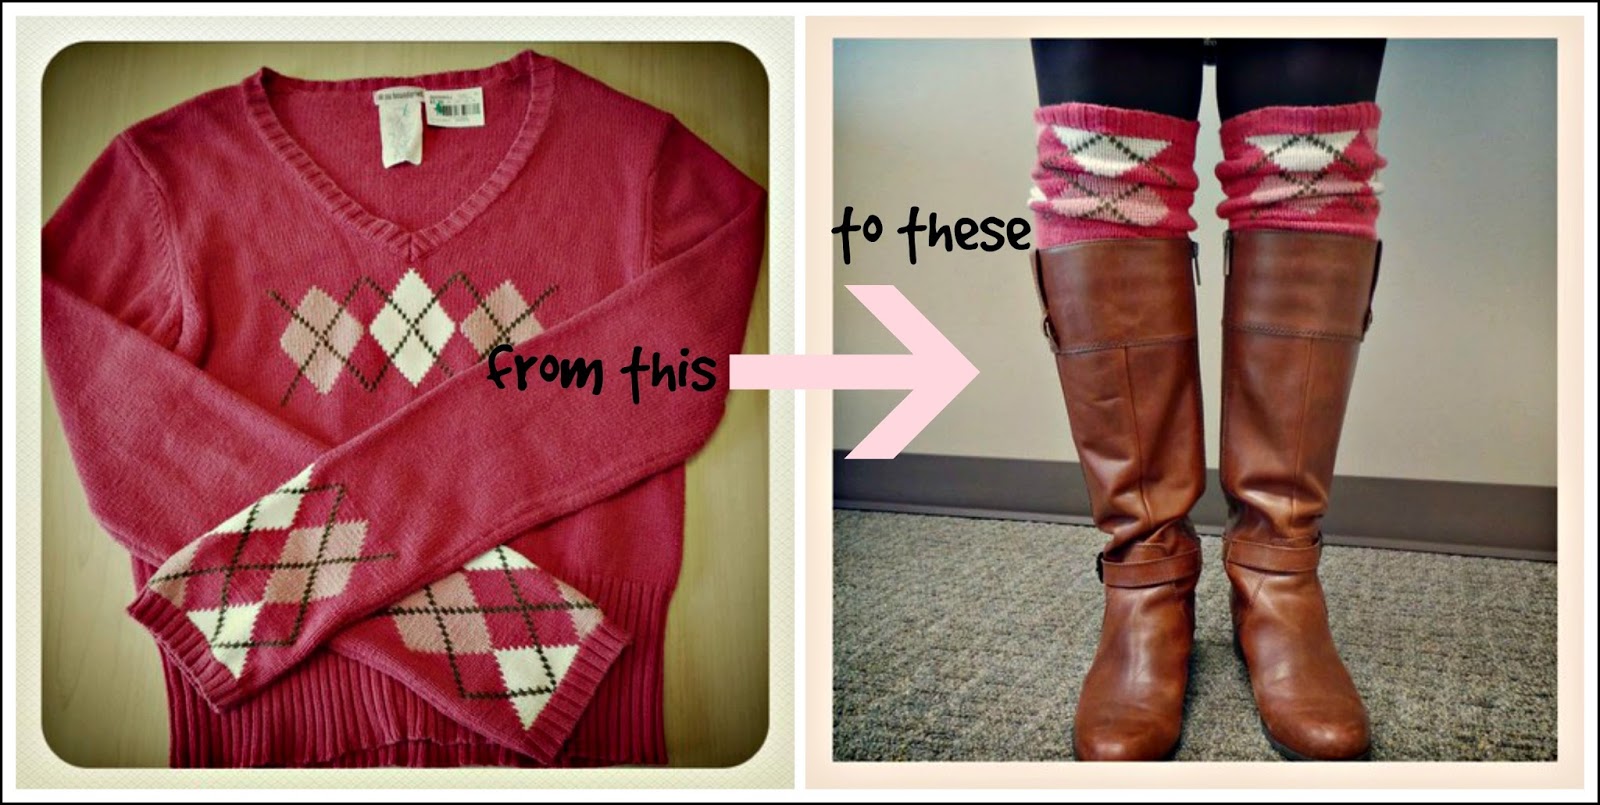 justalittlebitcute: Thrifty Thursday - Upcycled Boot Cuffs